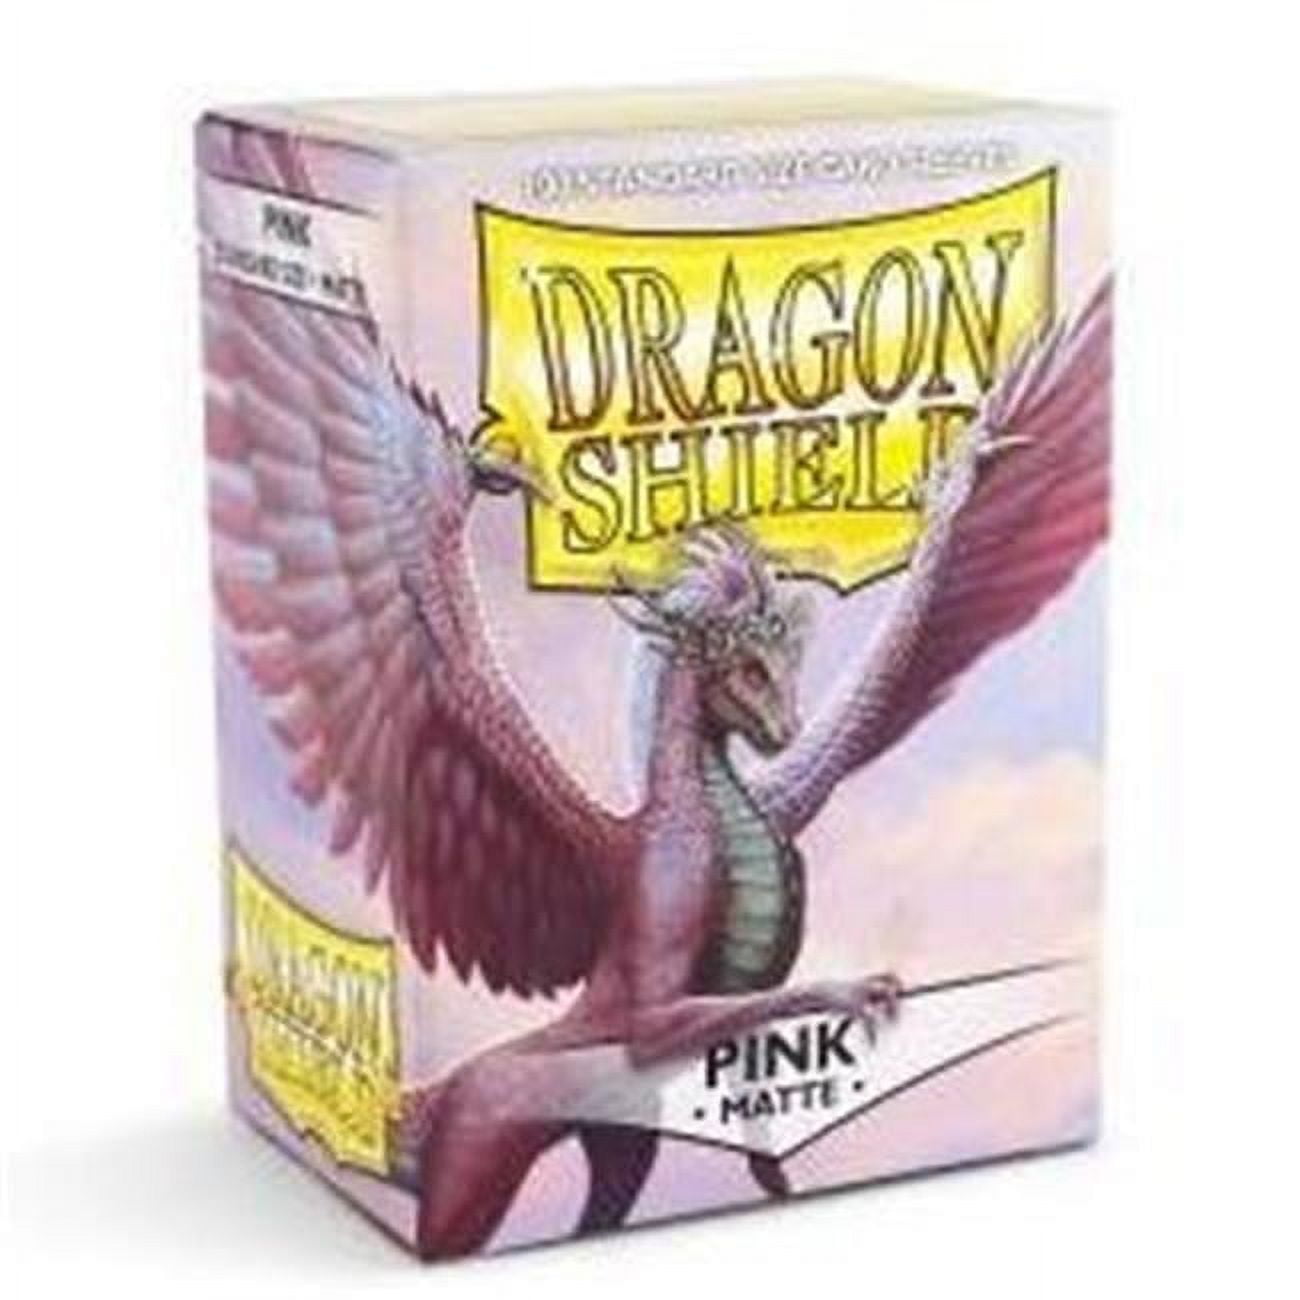 Atm11012 Dragon Shield Card Sleeves, Matte Pink - 100 Count